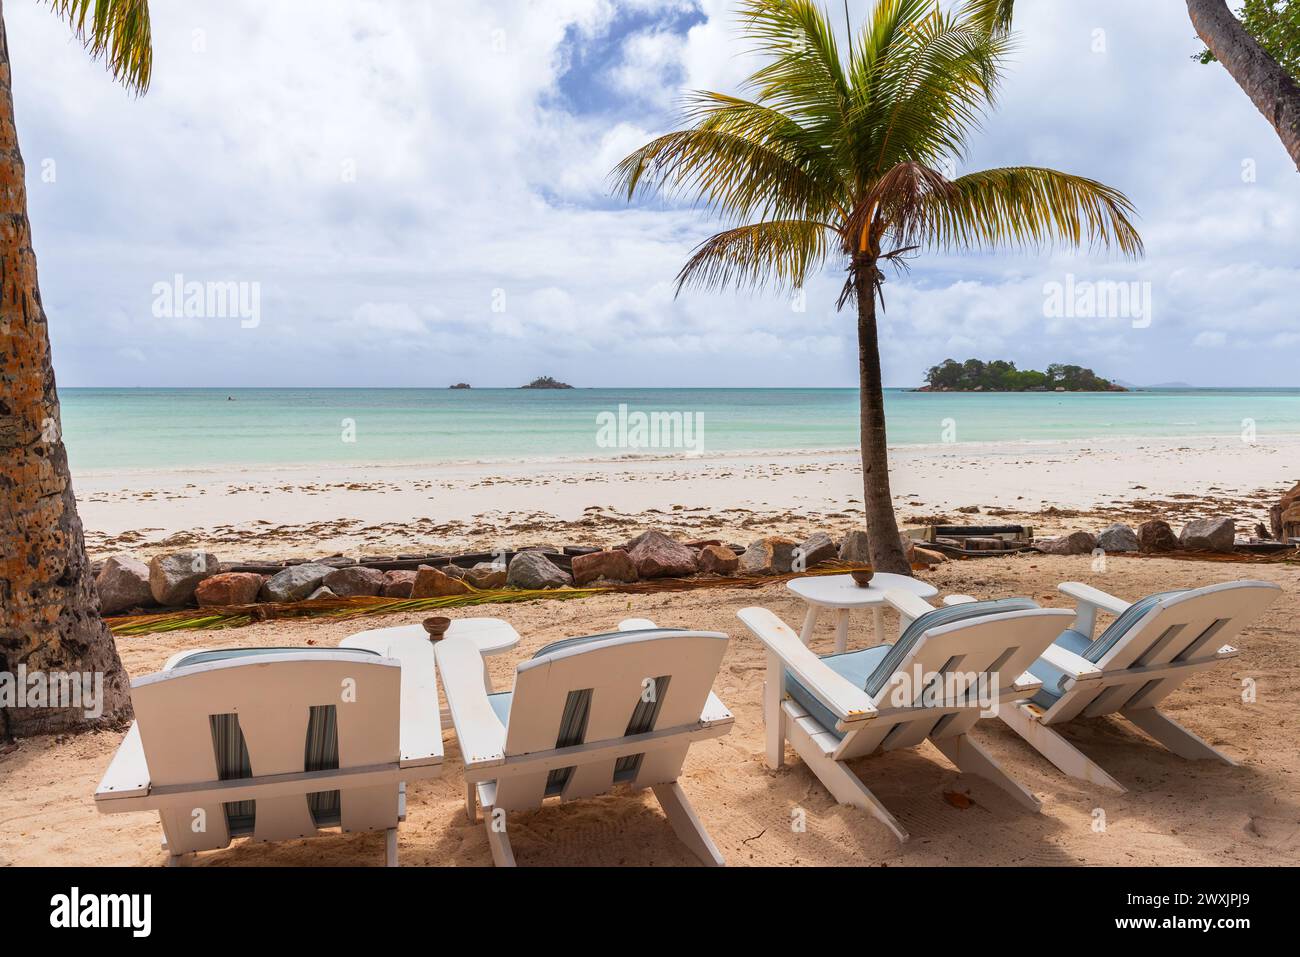 Seaside view with vacant white chaise lounges under coconut palm trees on a sunny day. Cote D'Or Beach, Praslin island, Seychelles Stock Photo